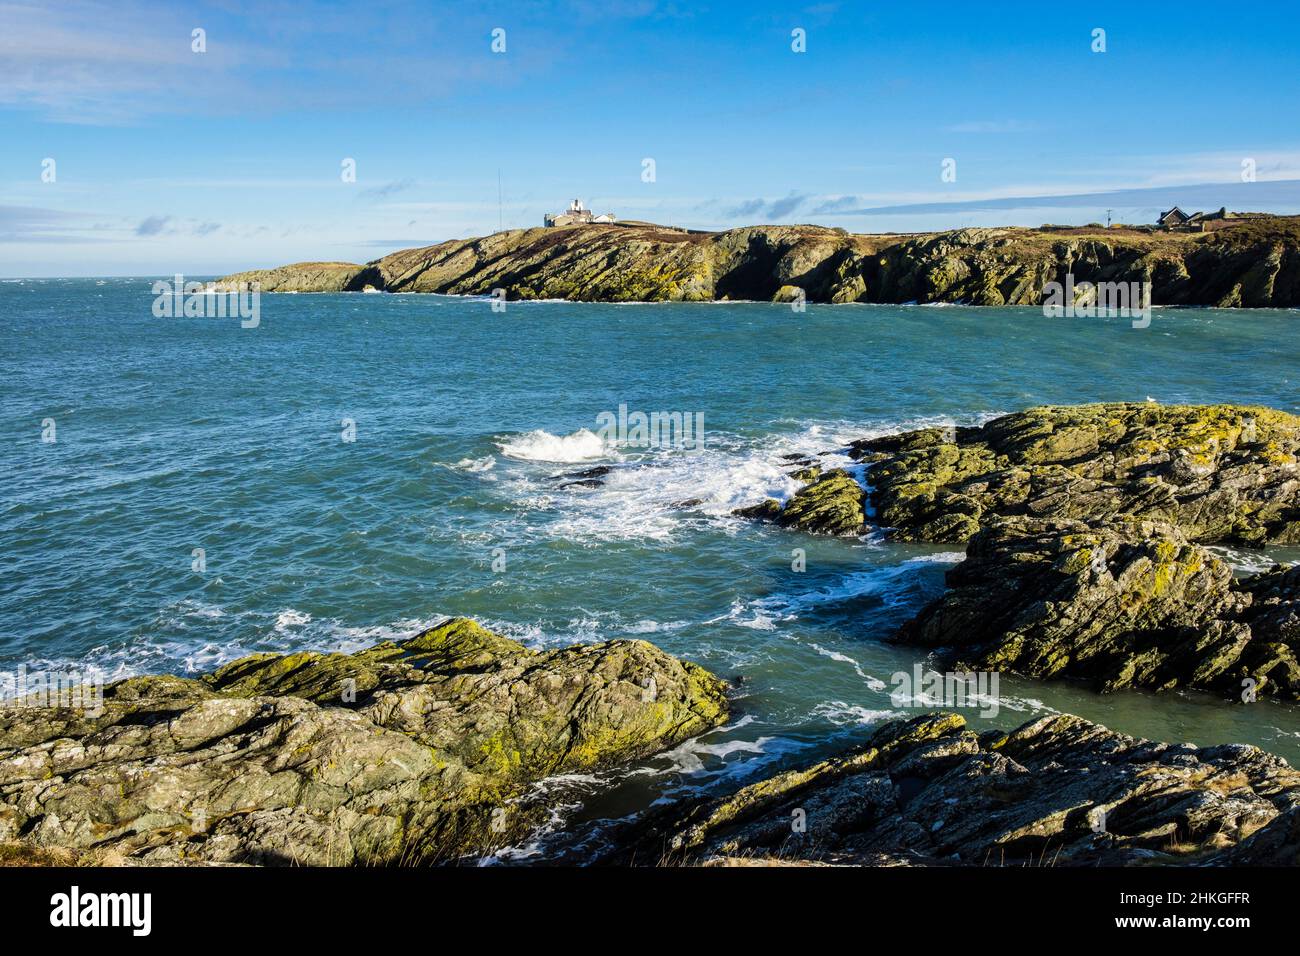 View across Porth Eilian to Point Lynas and lighthouse. Llaneilian, Amlwch, Isle of Anglesey, north Wales, UK, Britain Stock Photo